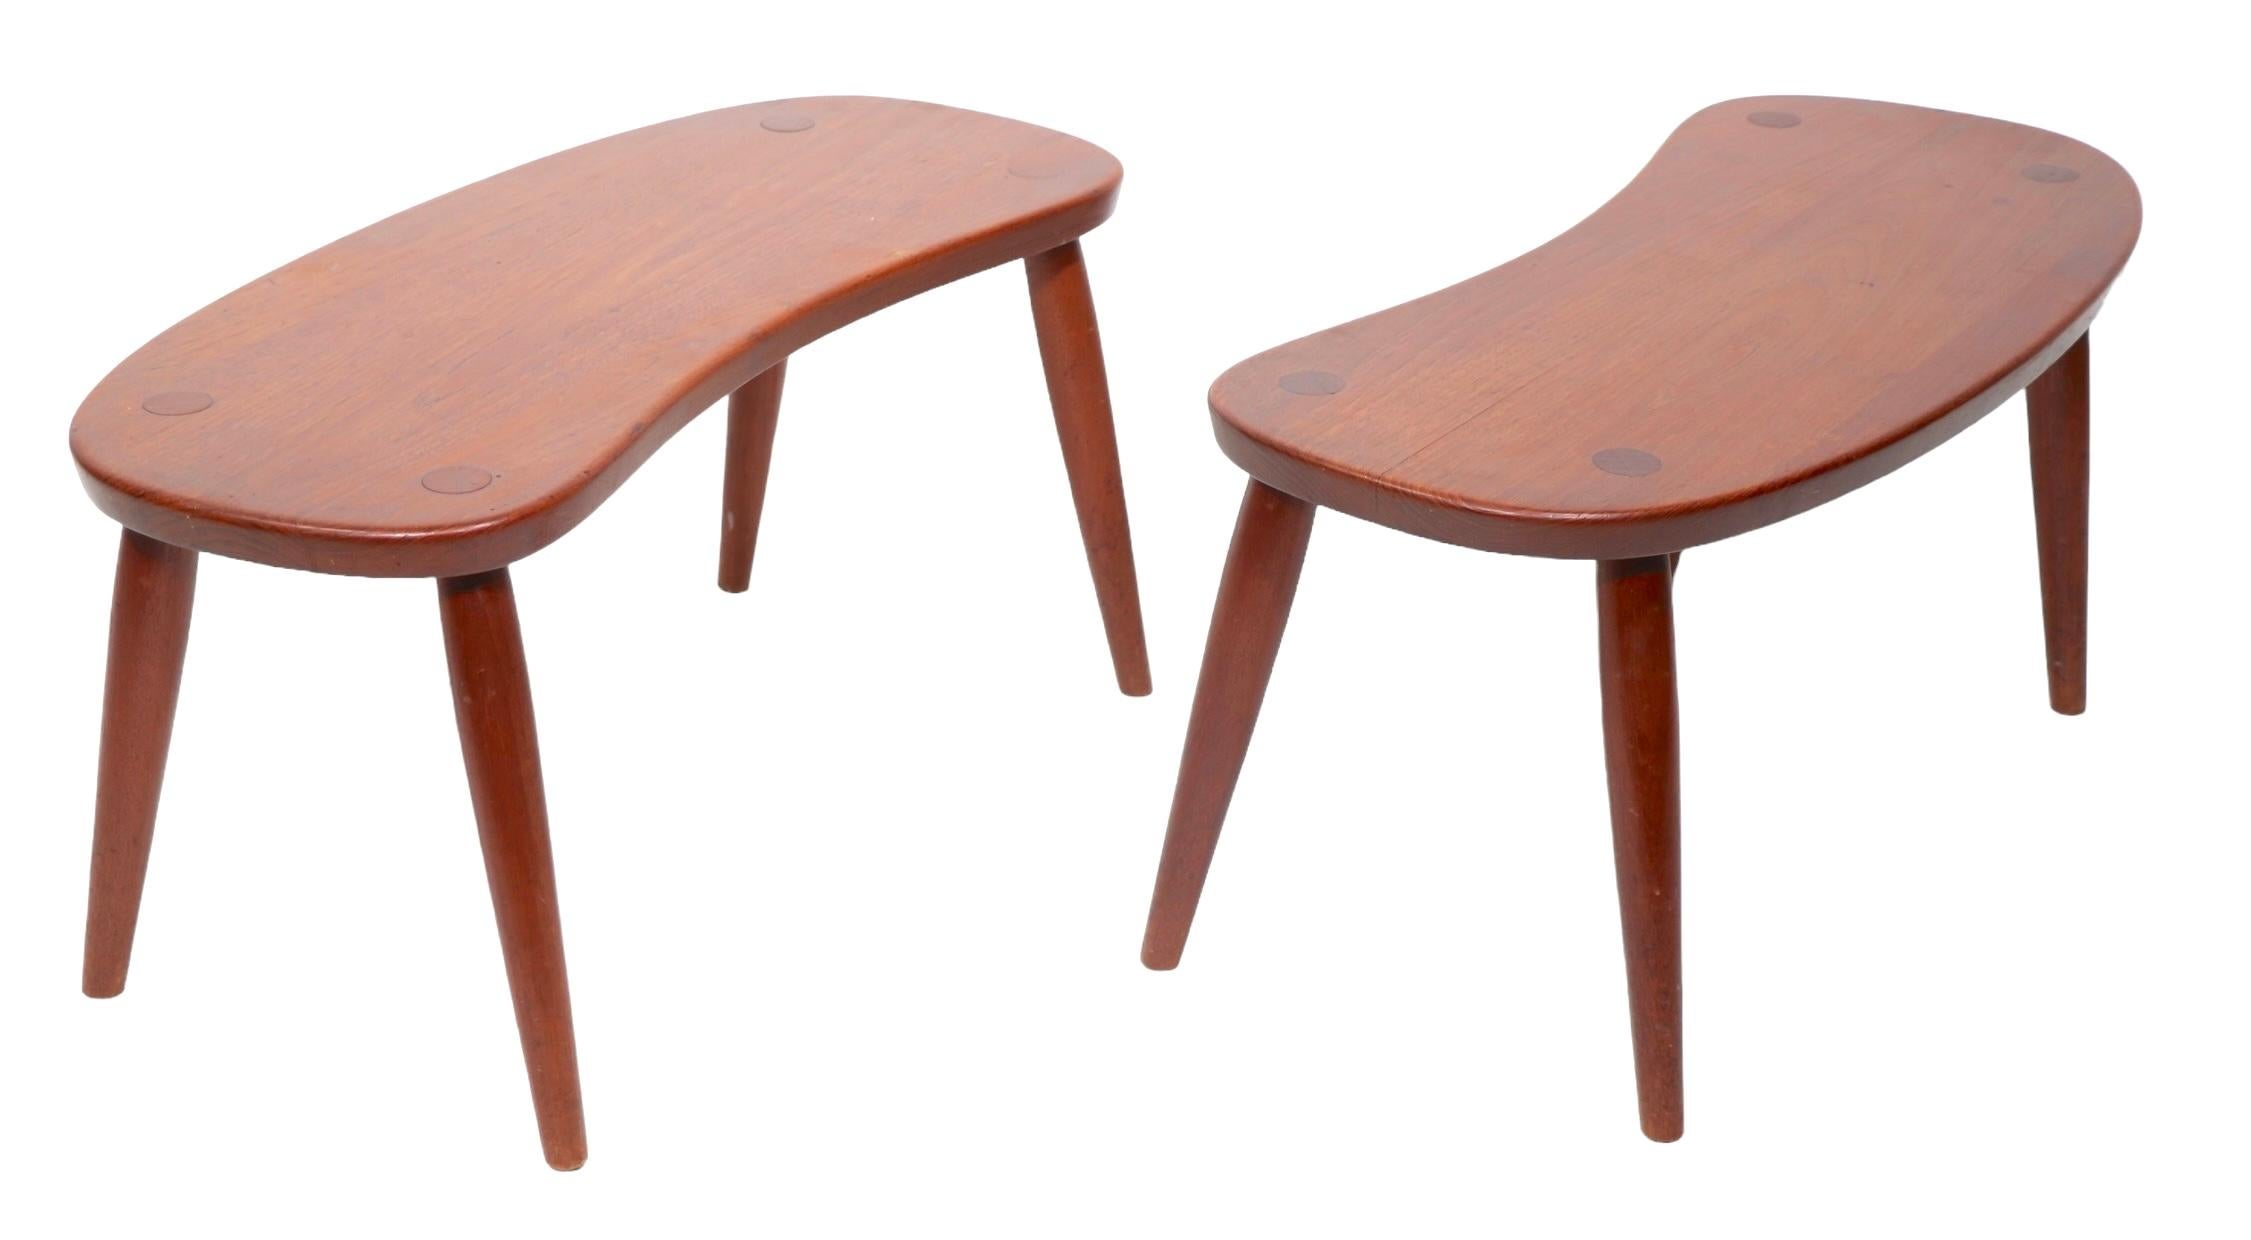 Exceptional pair of kidney shaped end, or side tables,  marked Illums Bolighus Kobenhavn ( Copenhagen ) on verso, design attributed to Josef Frank, circa 1950's. The tables are in very fine, clean, original, ready to use condition, showing only